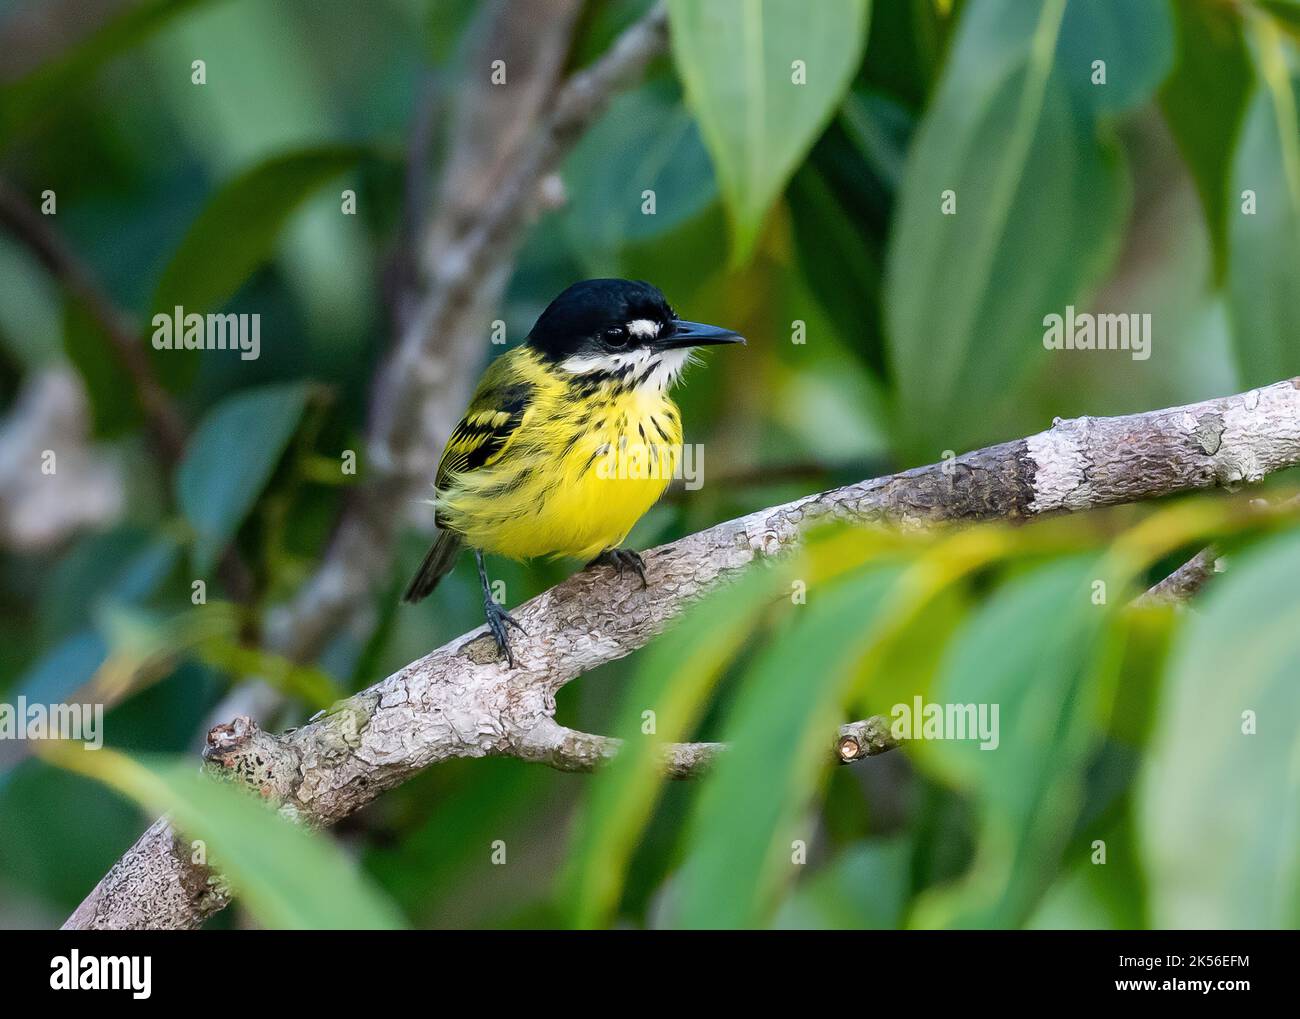 A Painted Tody-Flycatcher (Todirostrum pictum) perched on abranch. Amazonas, Brazil. Stock Photo